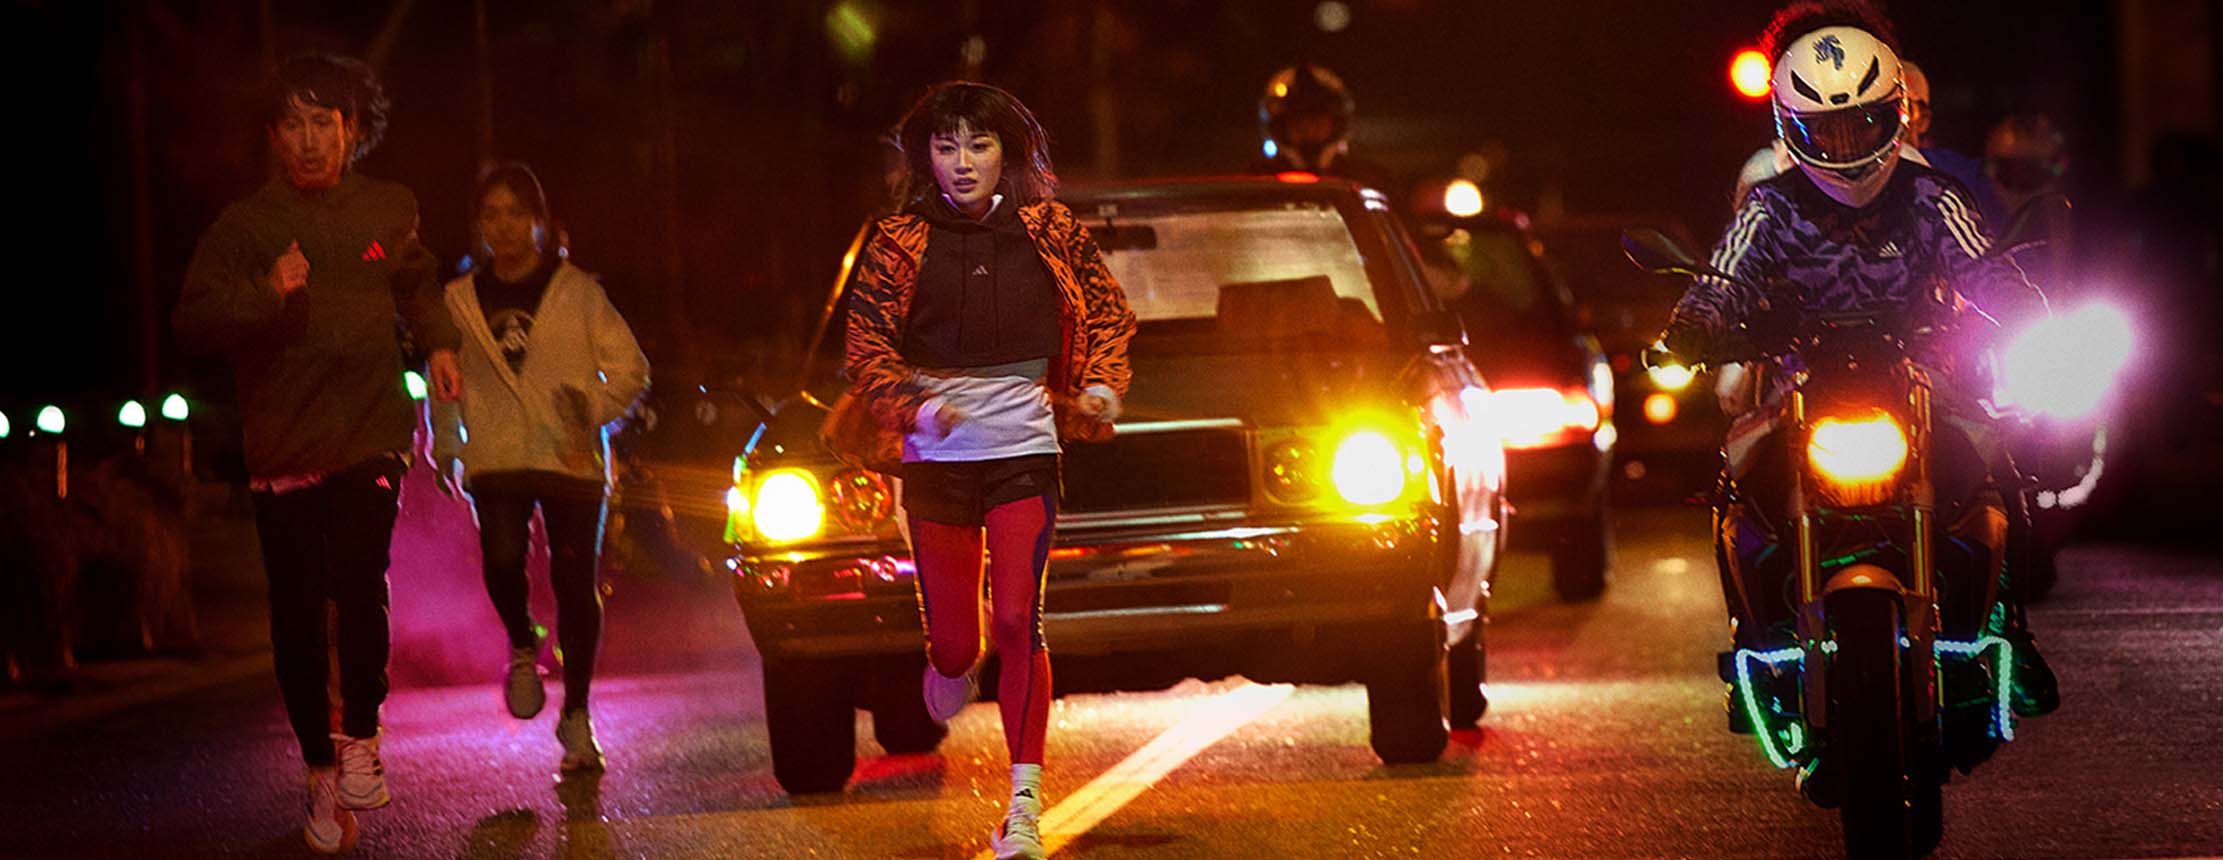 New adidas study finds 92% of women are concerned for their safety when they go for a run